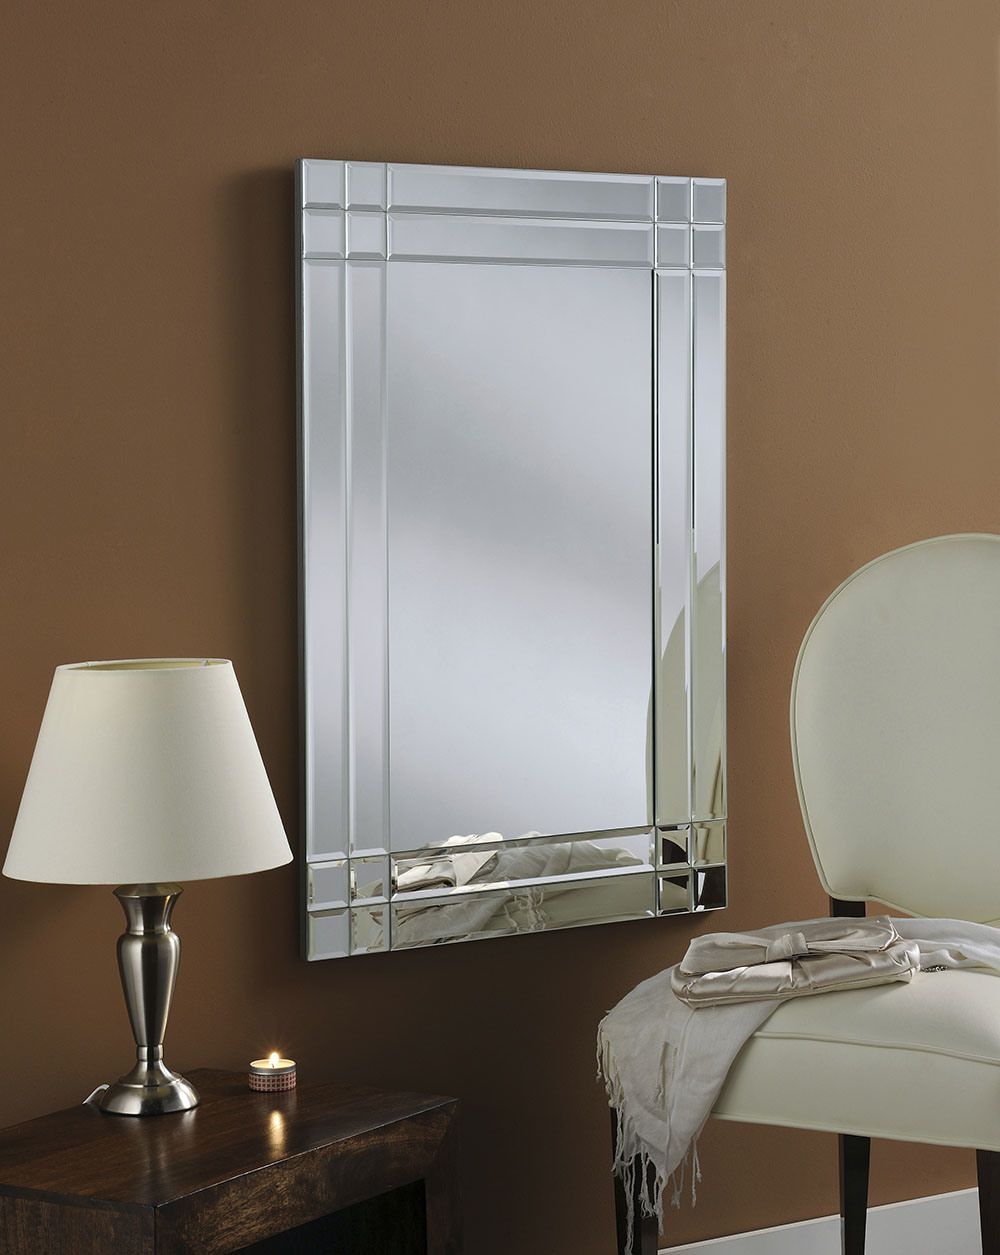 China Vanity Sheffield Home Decorative Modern Wall Mirror – China Throughout Levan Modern &amp; Contemporary Accent Mirrors (View 8 of 15)